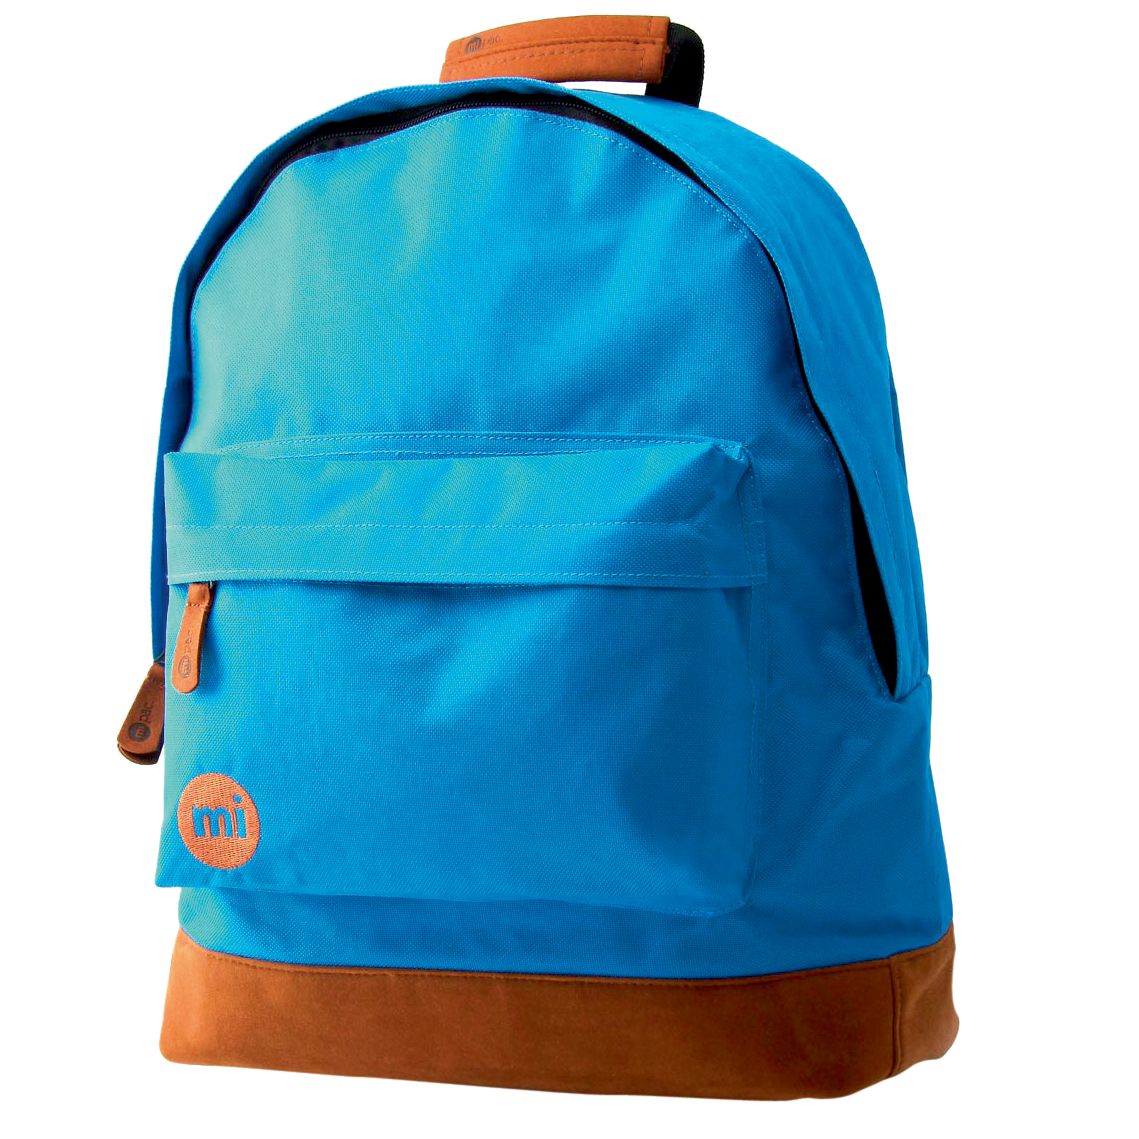 Mi-Pac Classic Backpack, Royal Blue at John Lewis & Partners